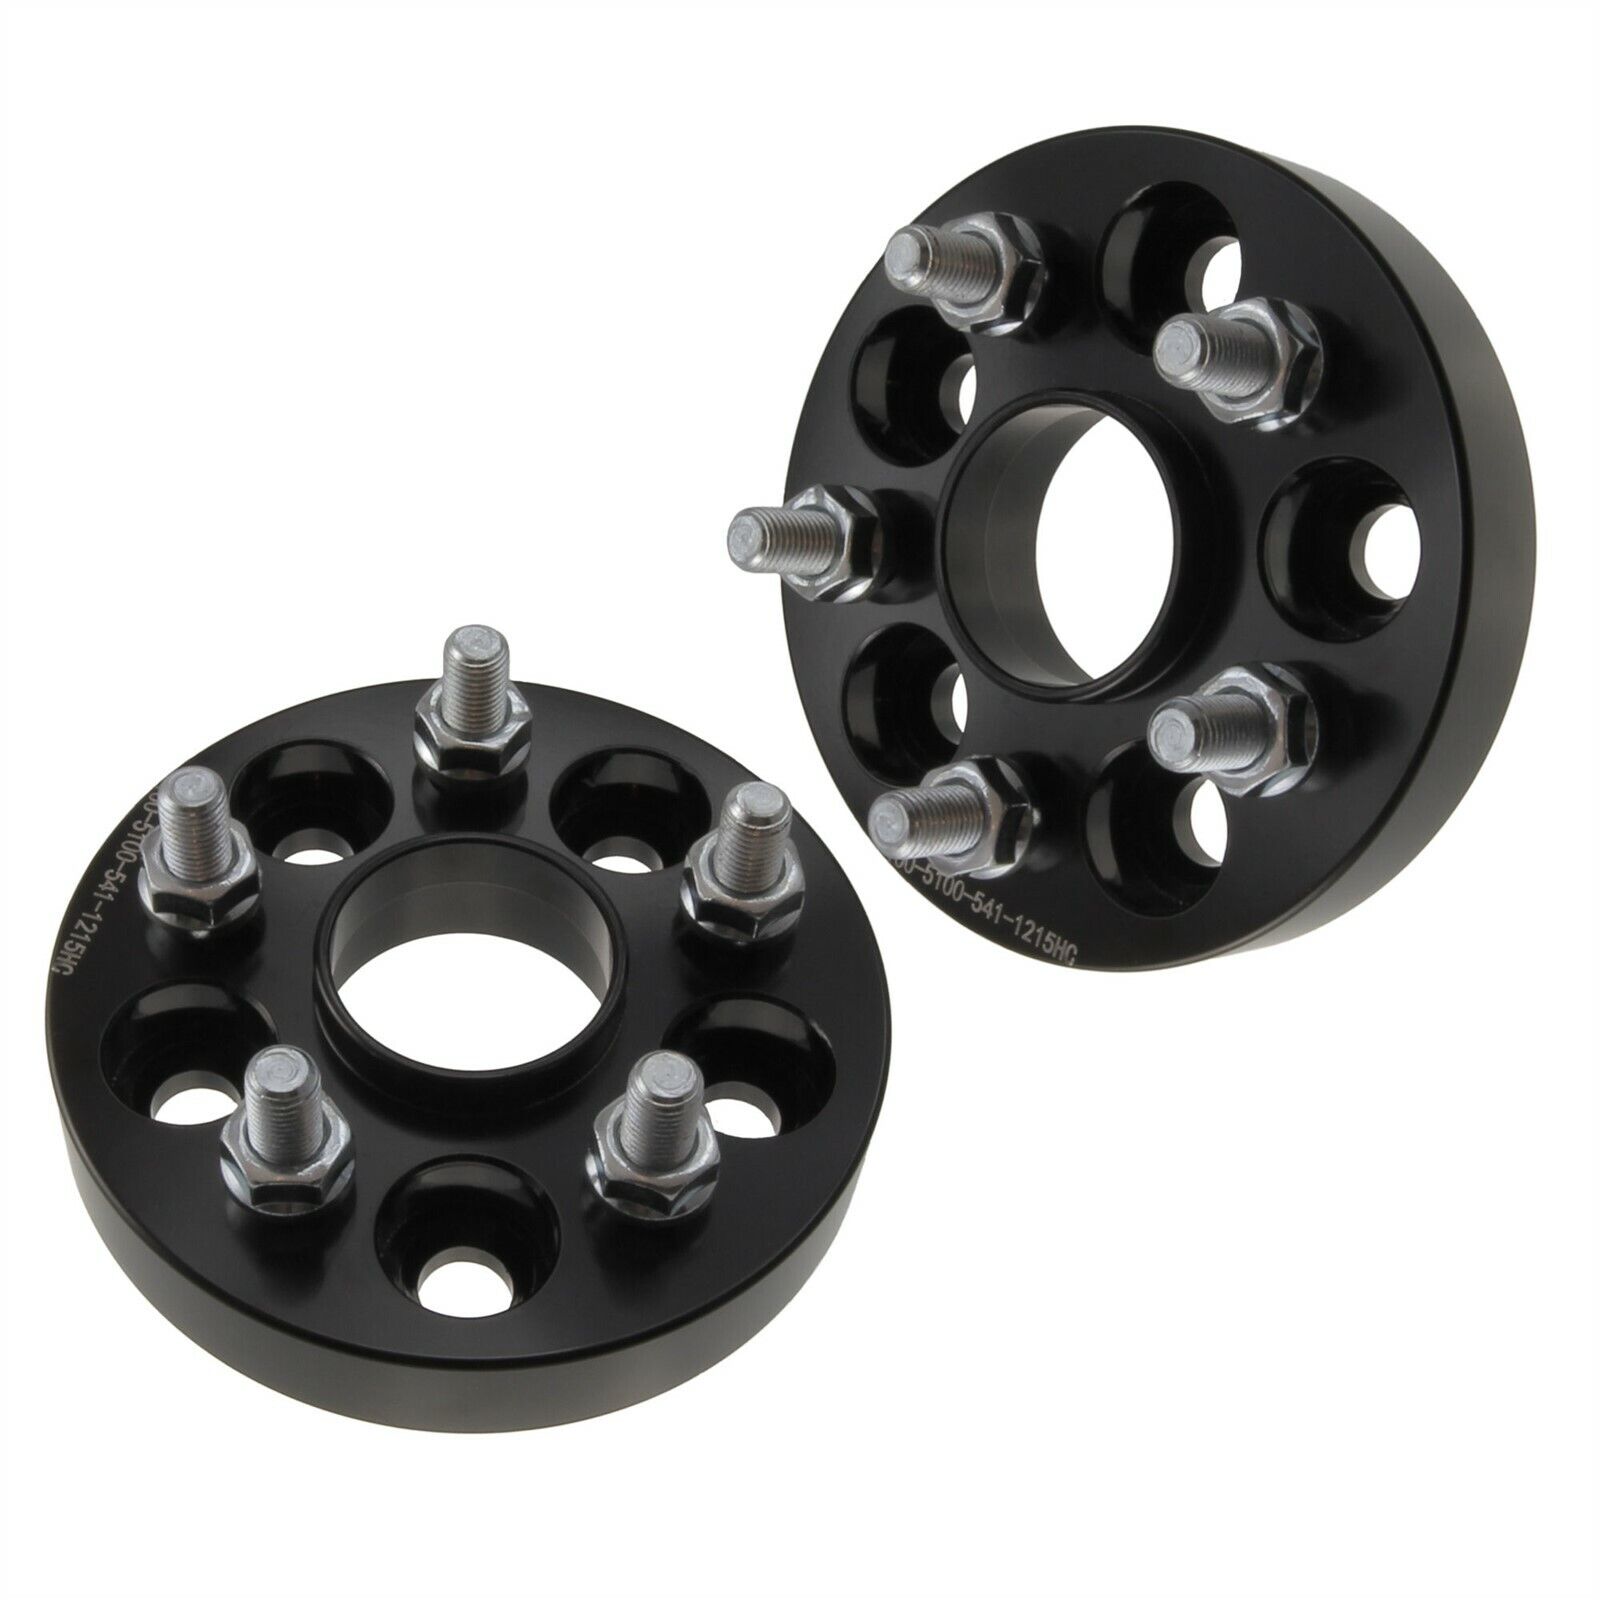 2x 25mm Hubcentric Wheel Spacers 5x100 | Fits Toyota Celica Corolla Scion xD tC